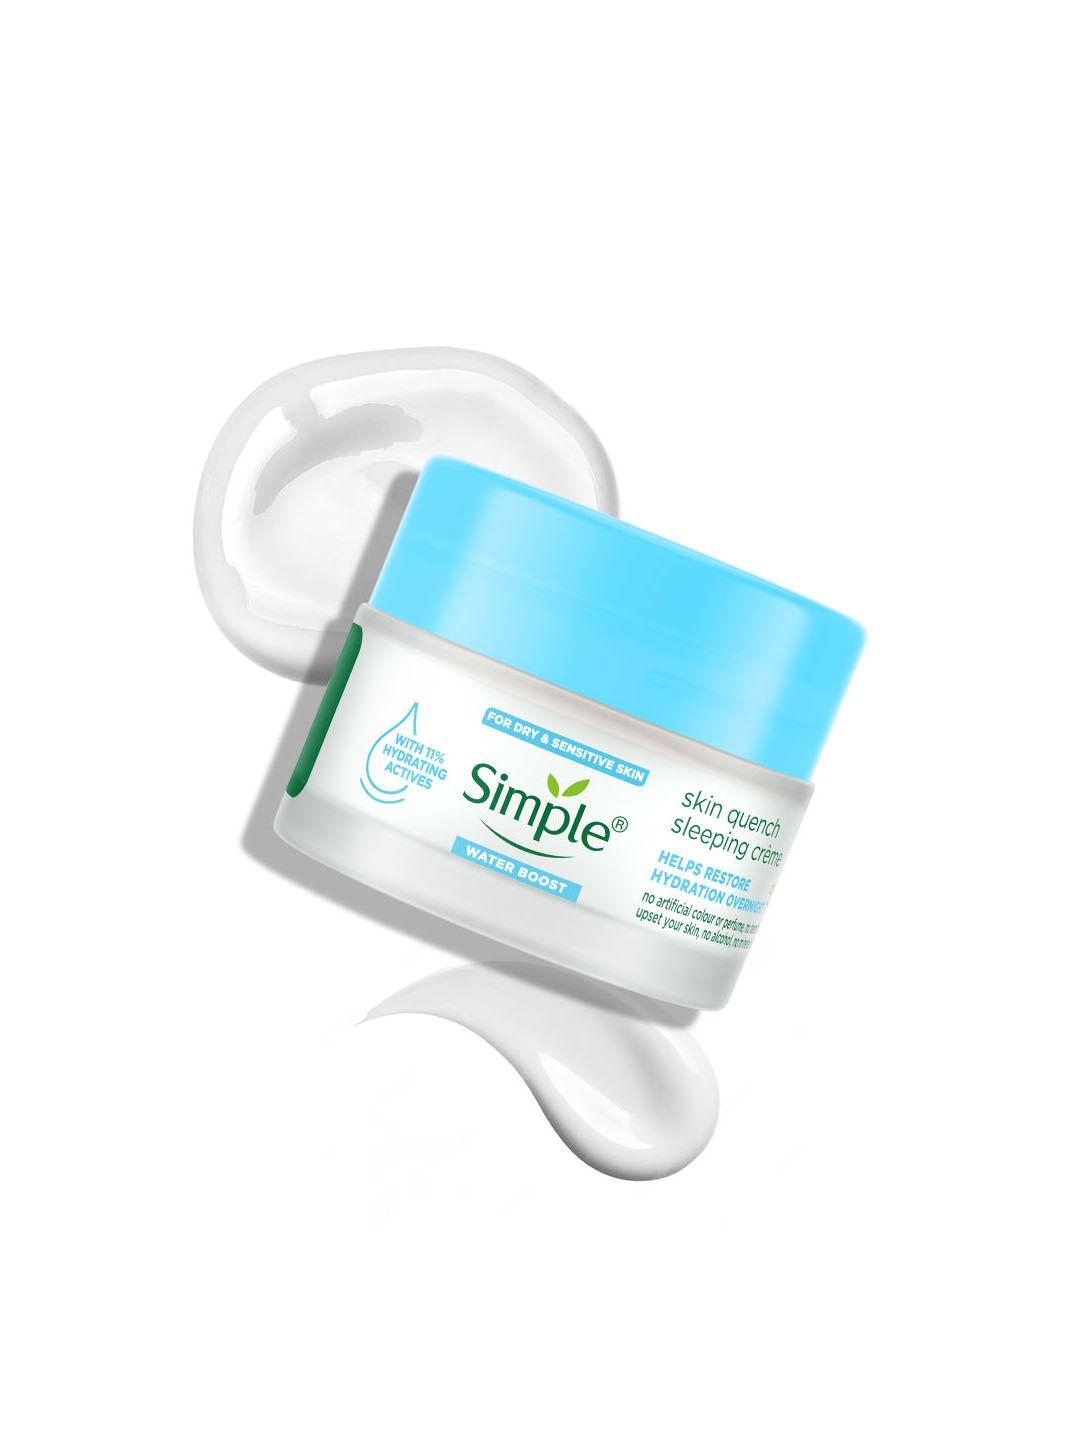 simple water boost skin quench sleeping creme for dry sensitive skin with pentavitin - 50g